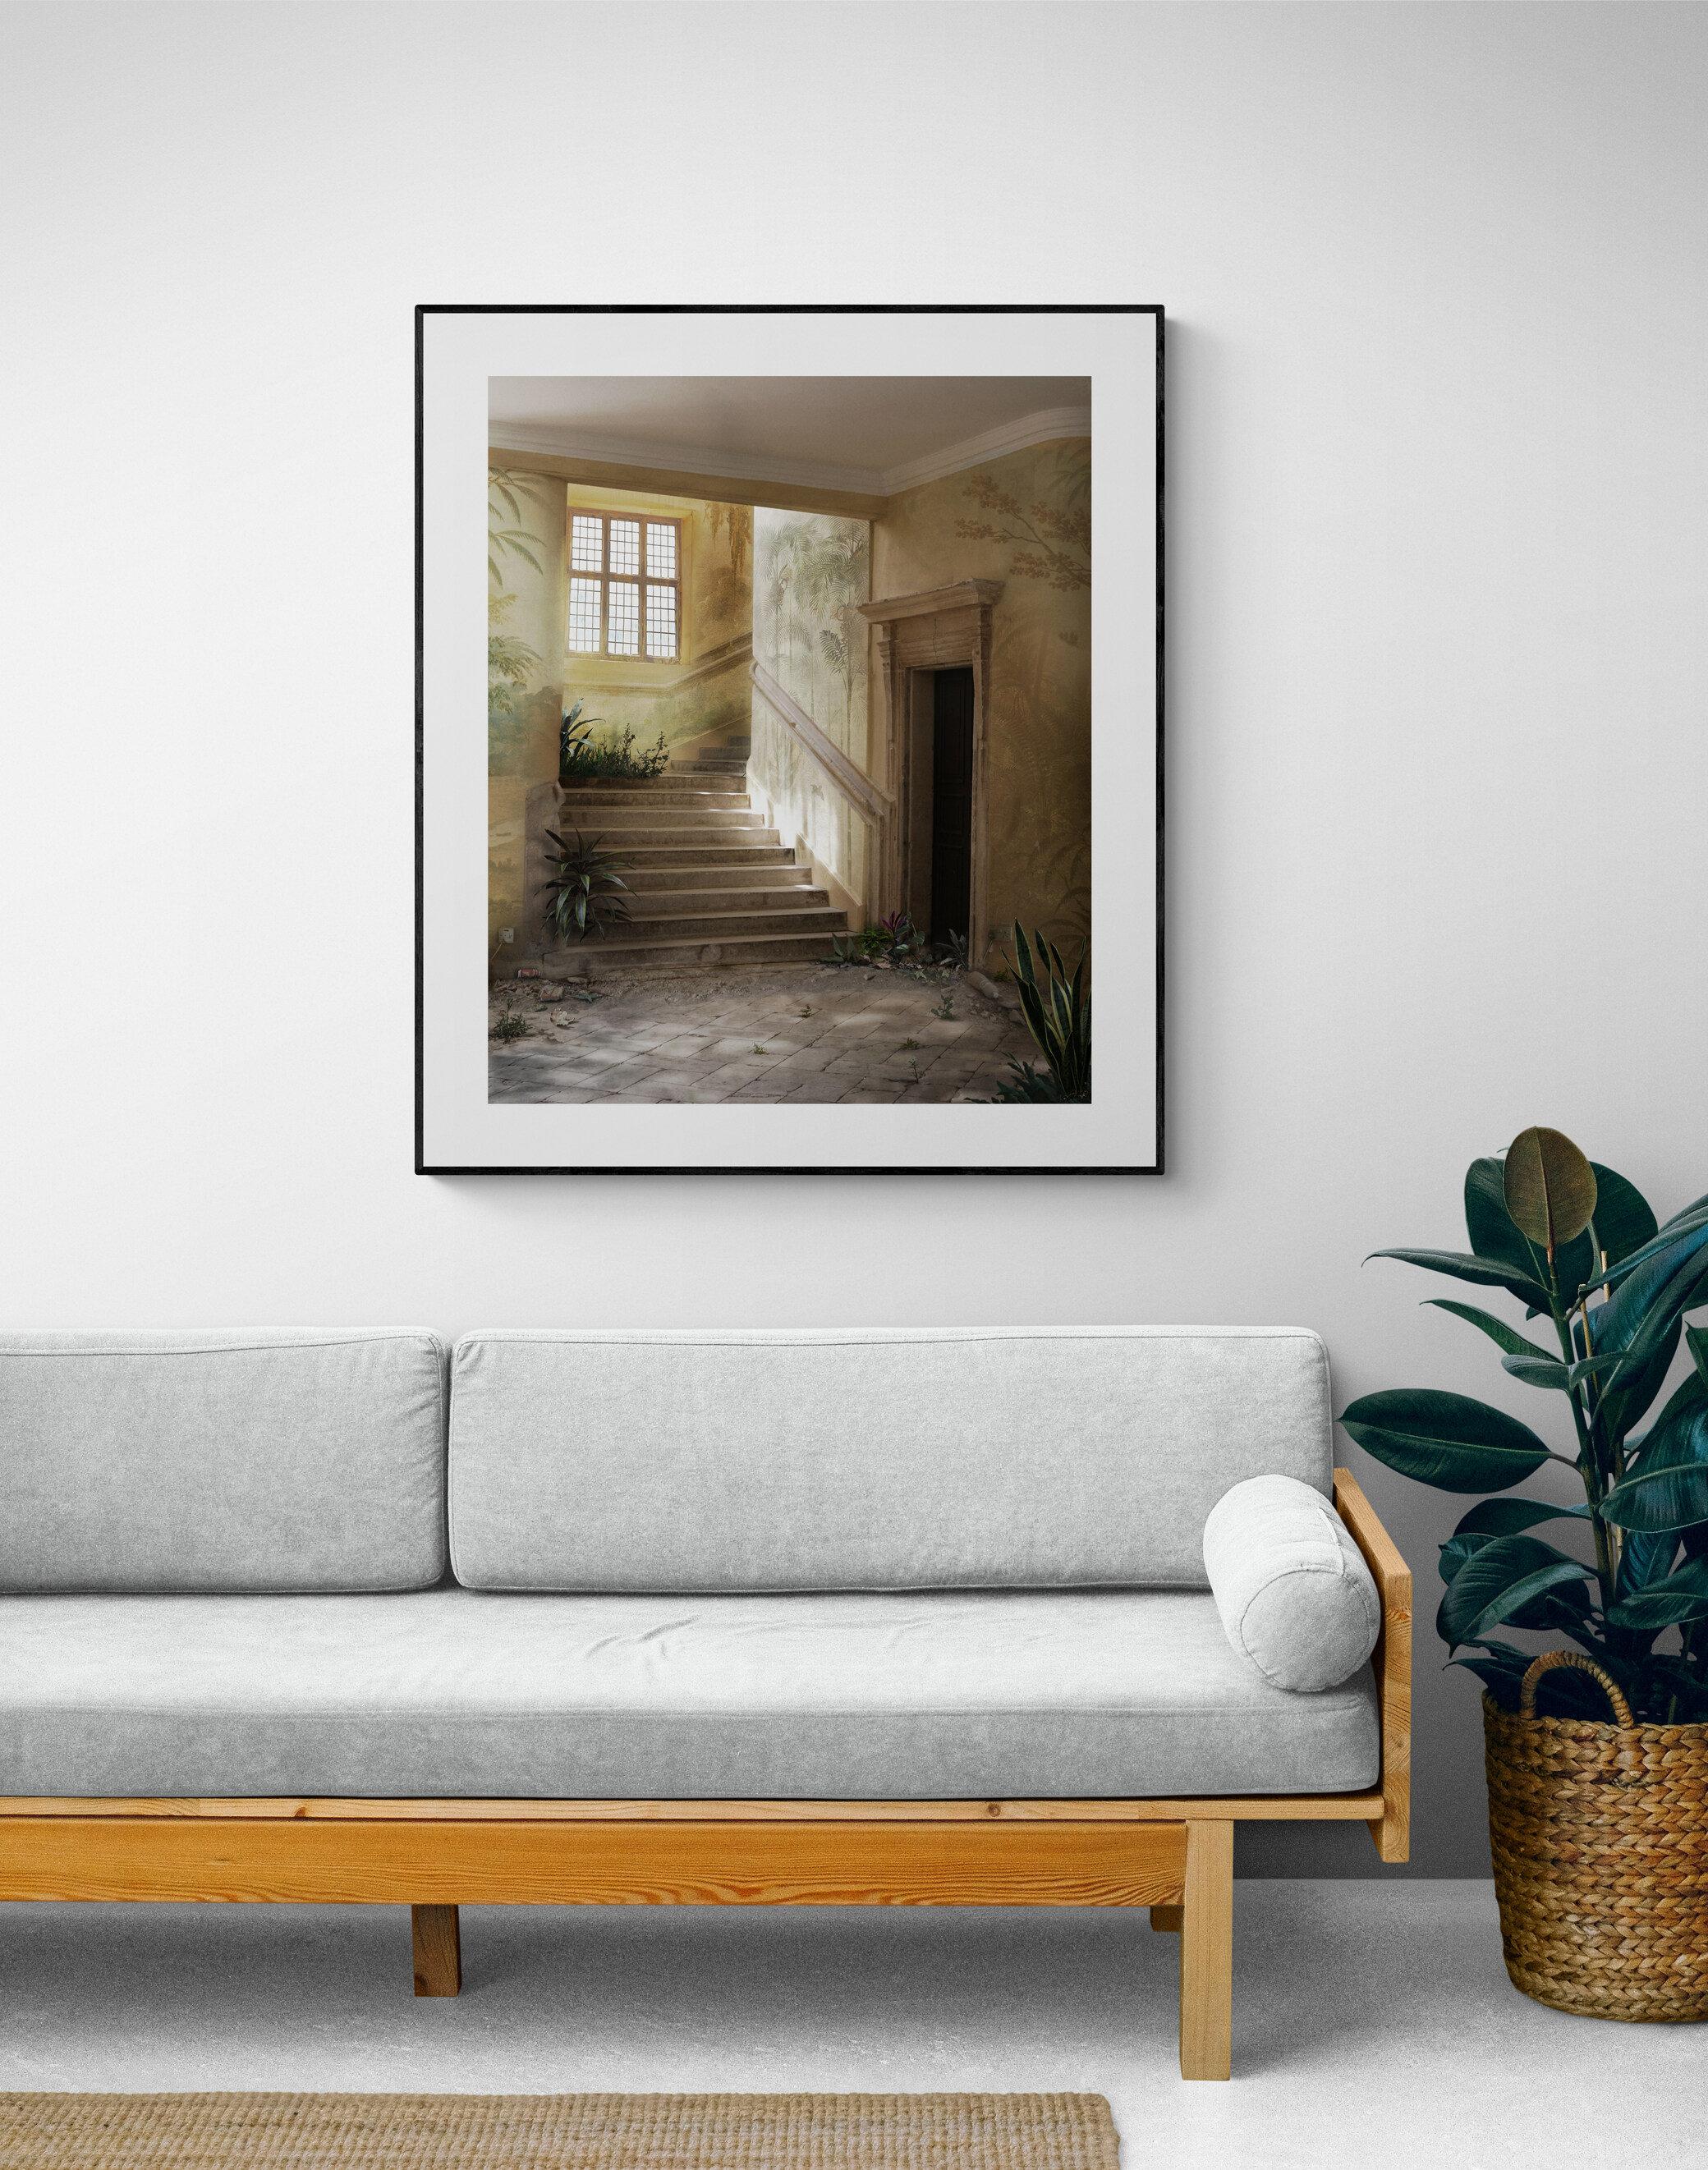 Rockery - Interiors Photography, Fenster, Staircase im Angebot 2